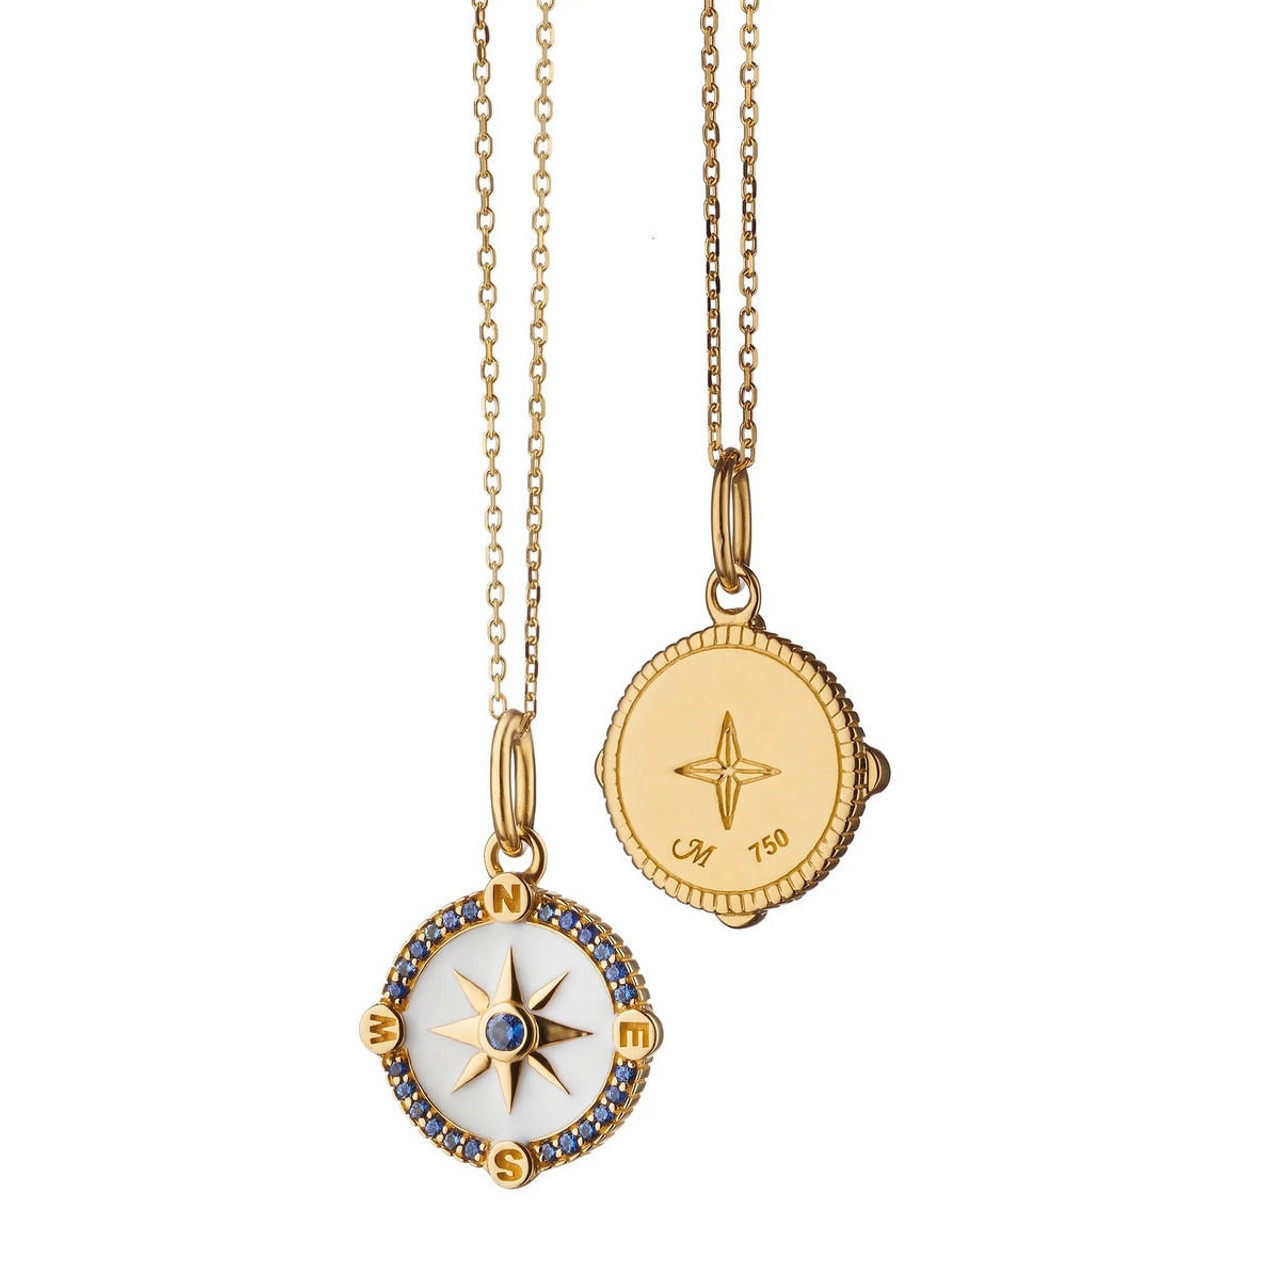 9ct Gold Compass Necklace - 16 - 18 Inches | Jewellerybox.co.uk